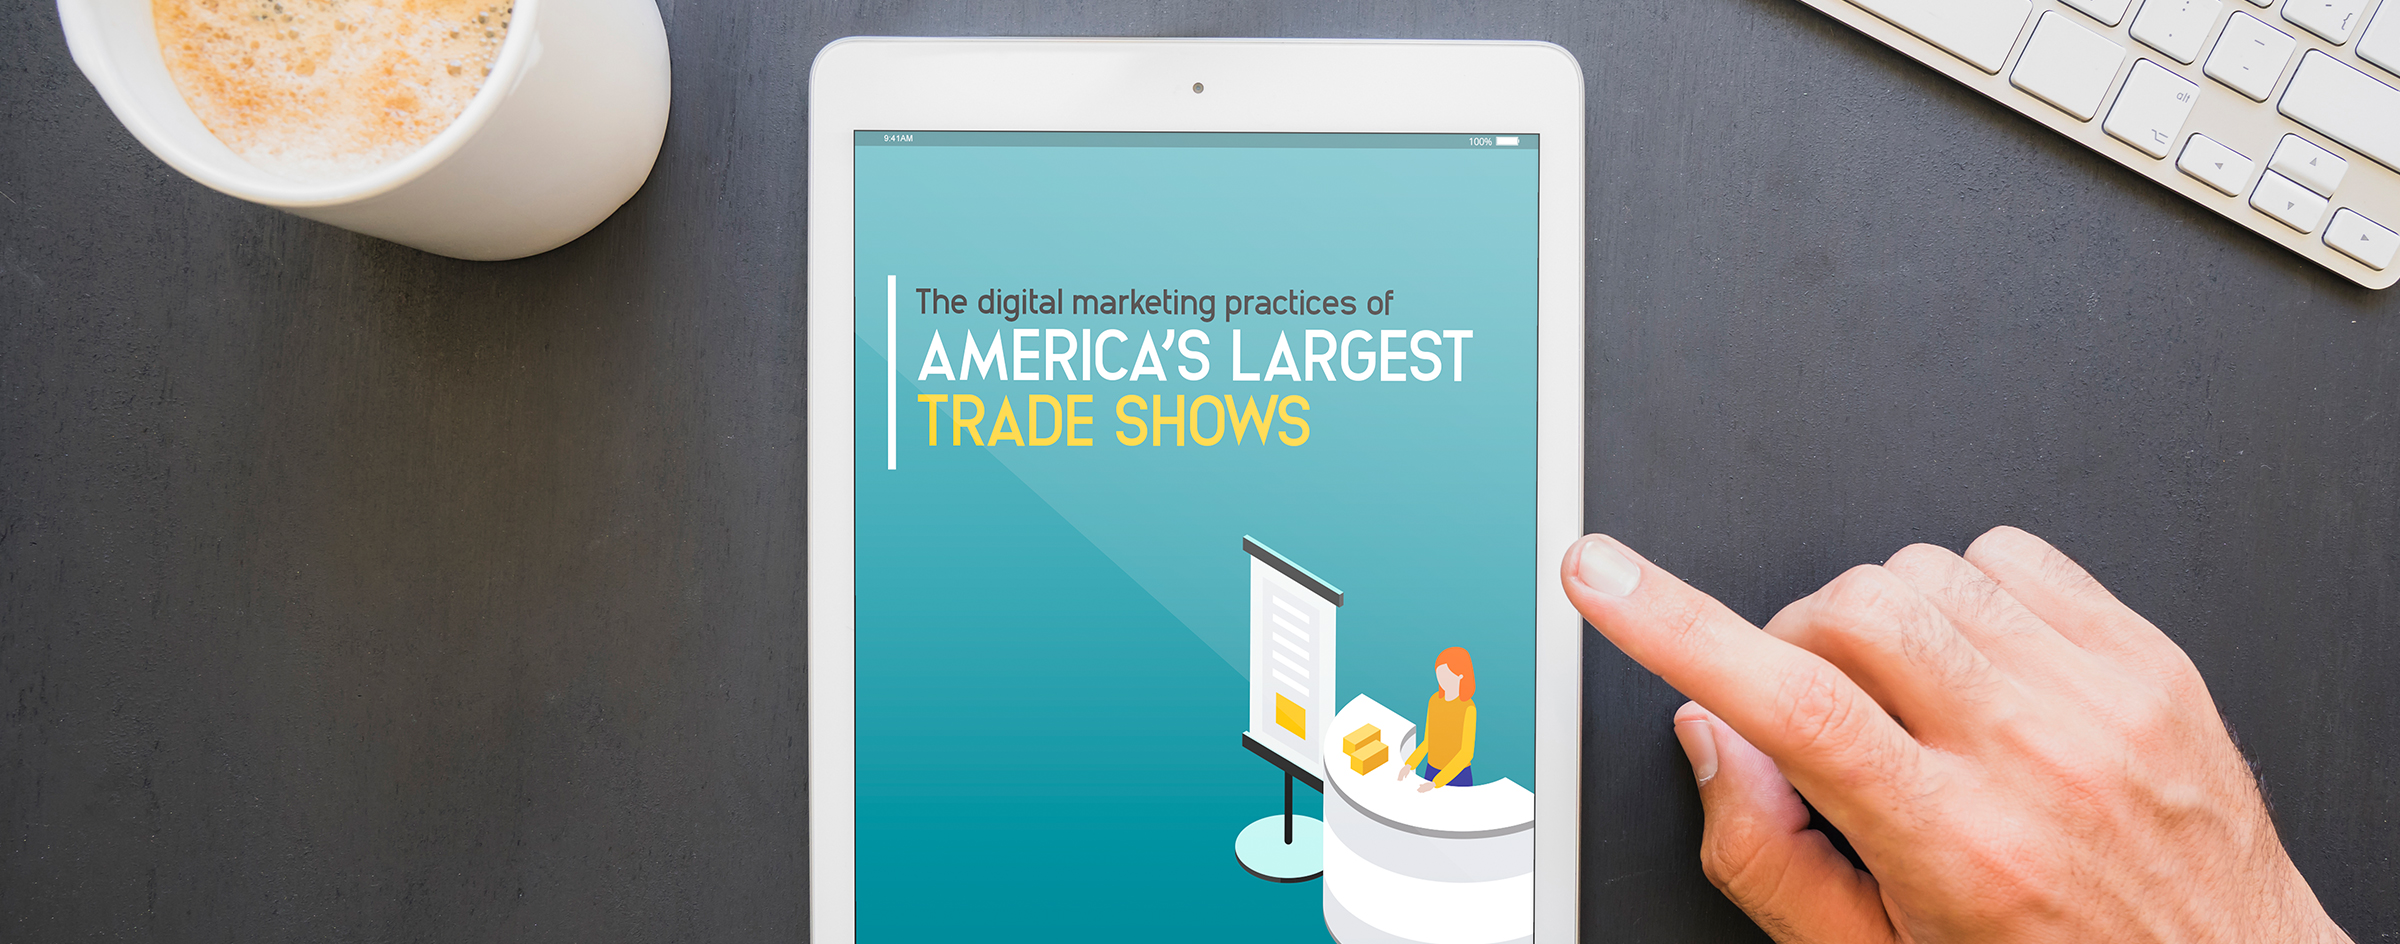 The digital marketing practices of America’s largest trade shows